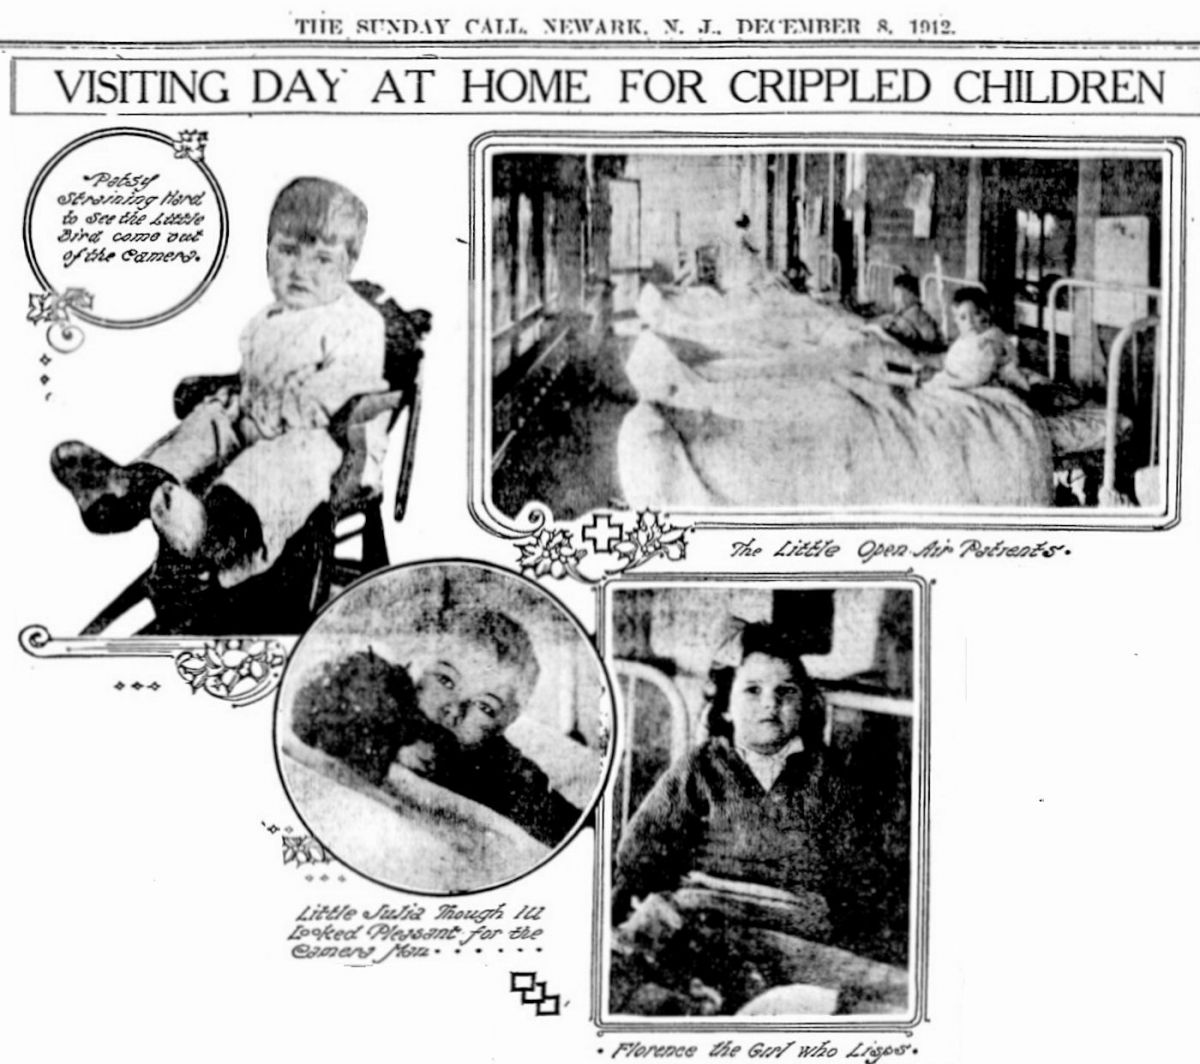 Visiting Day at Home for Crippled Children
1912
